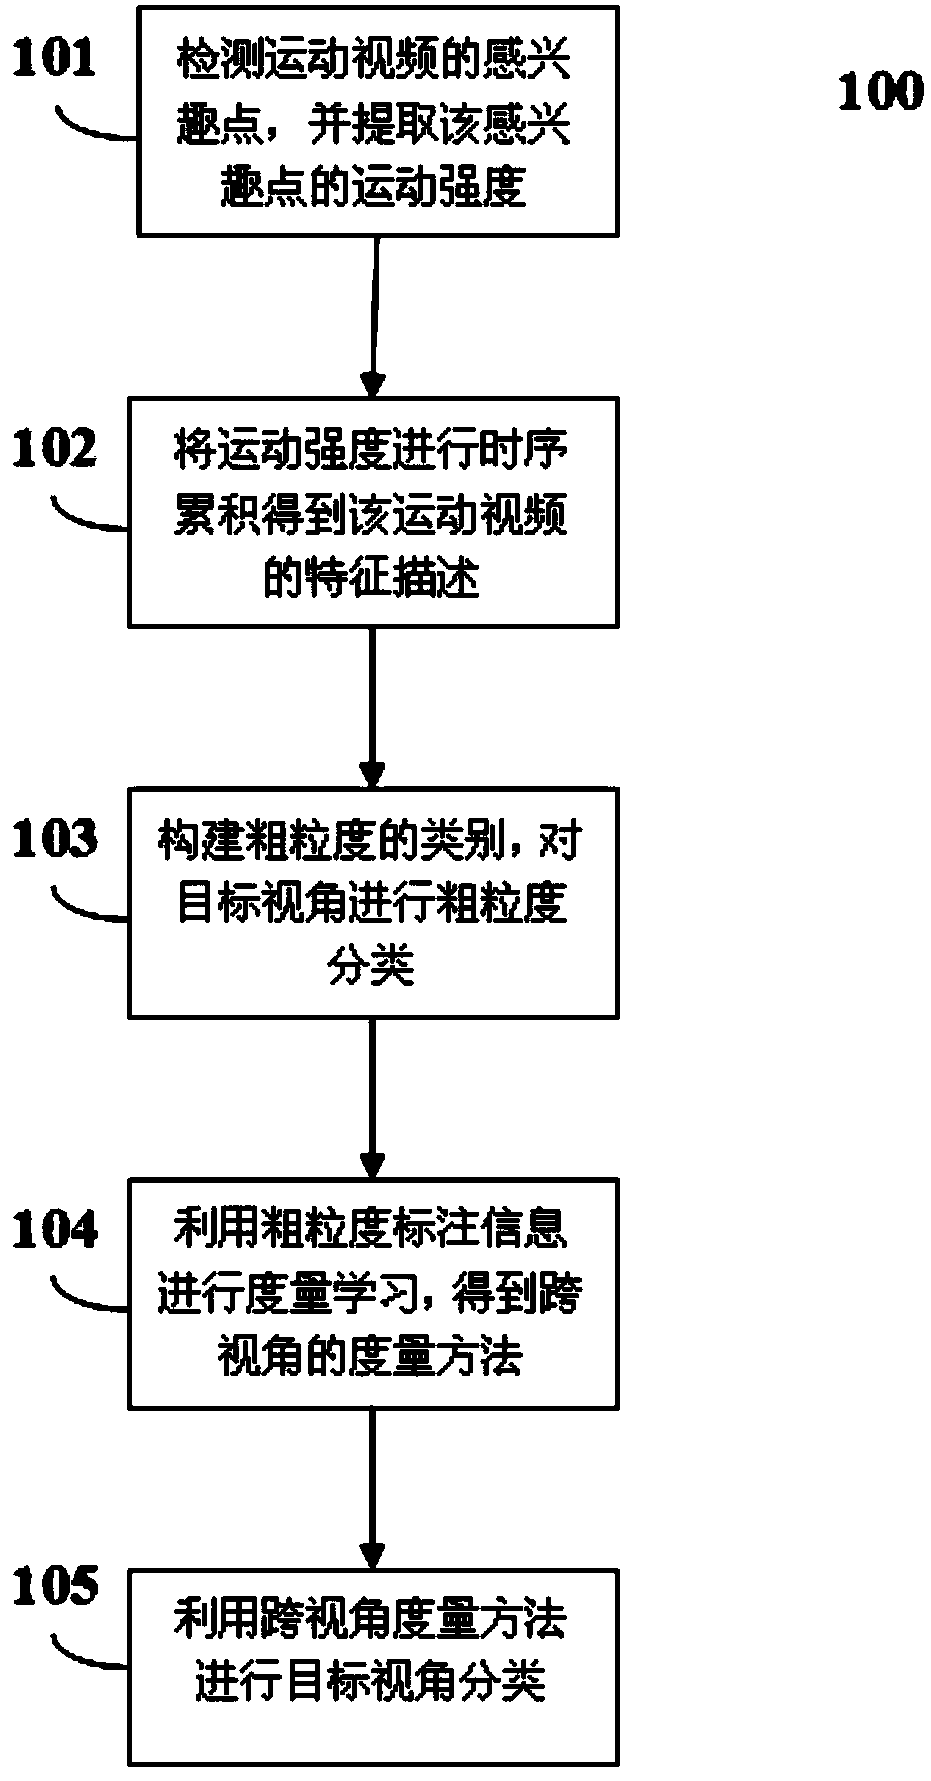 Cross-view-angle action identification method and system based on time sequence information